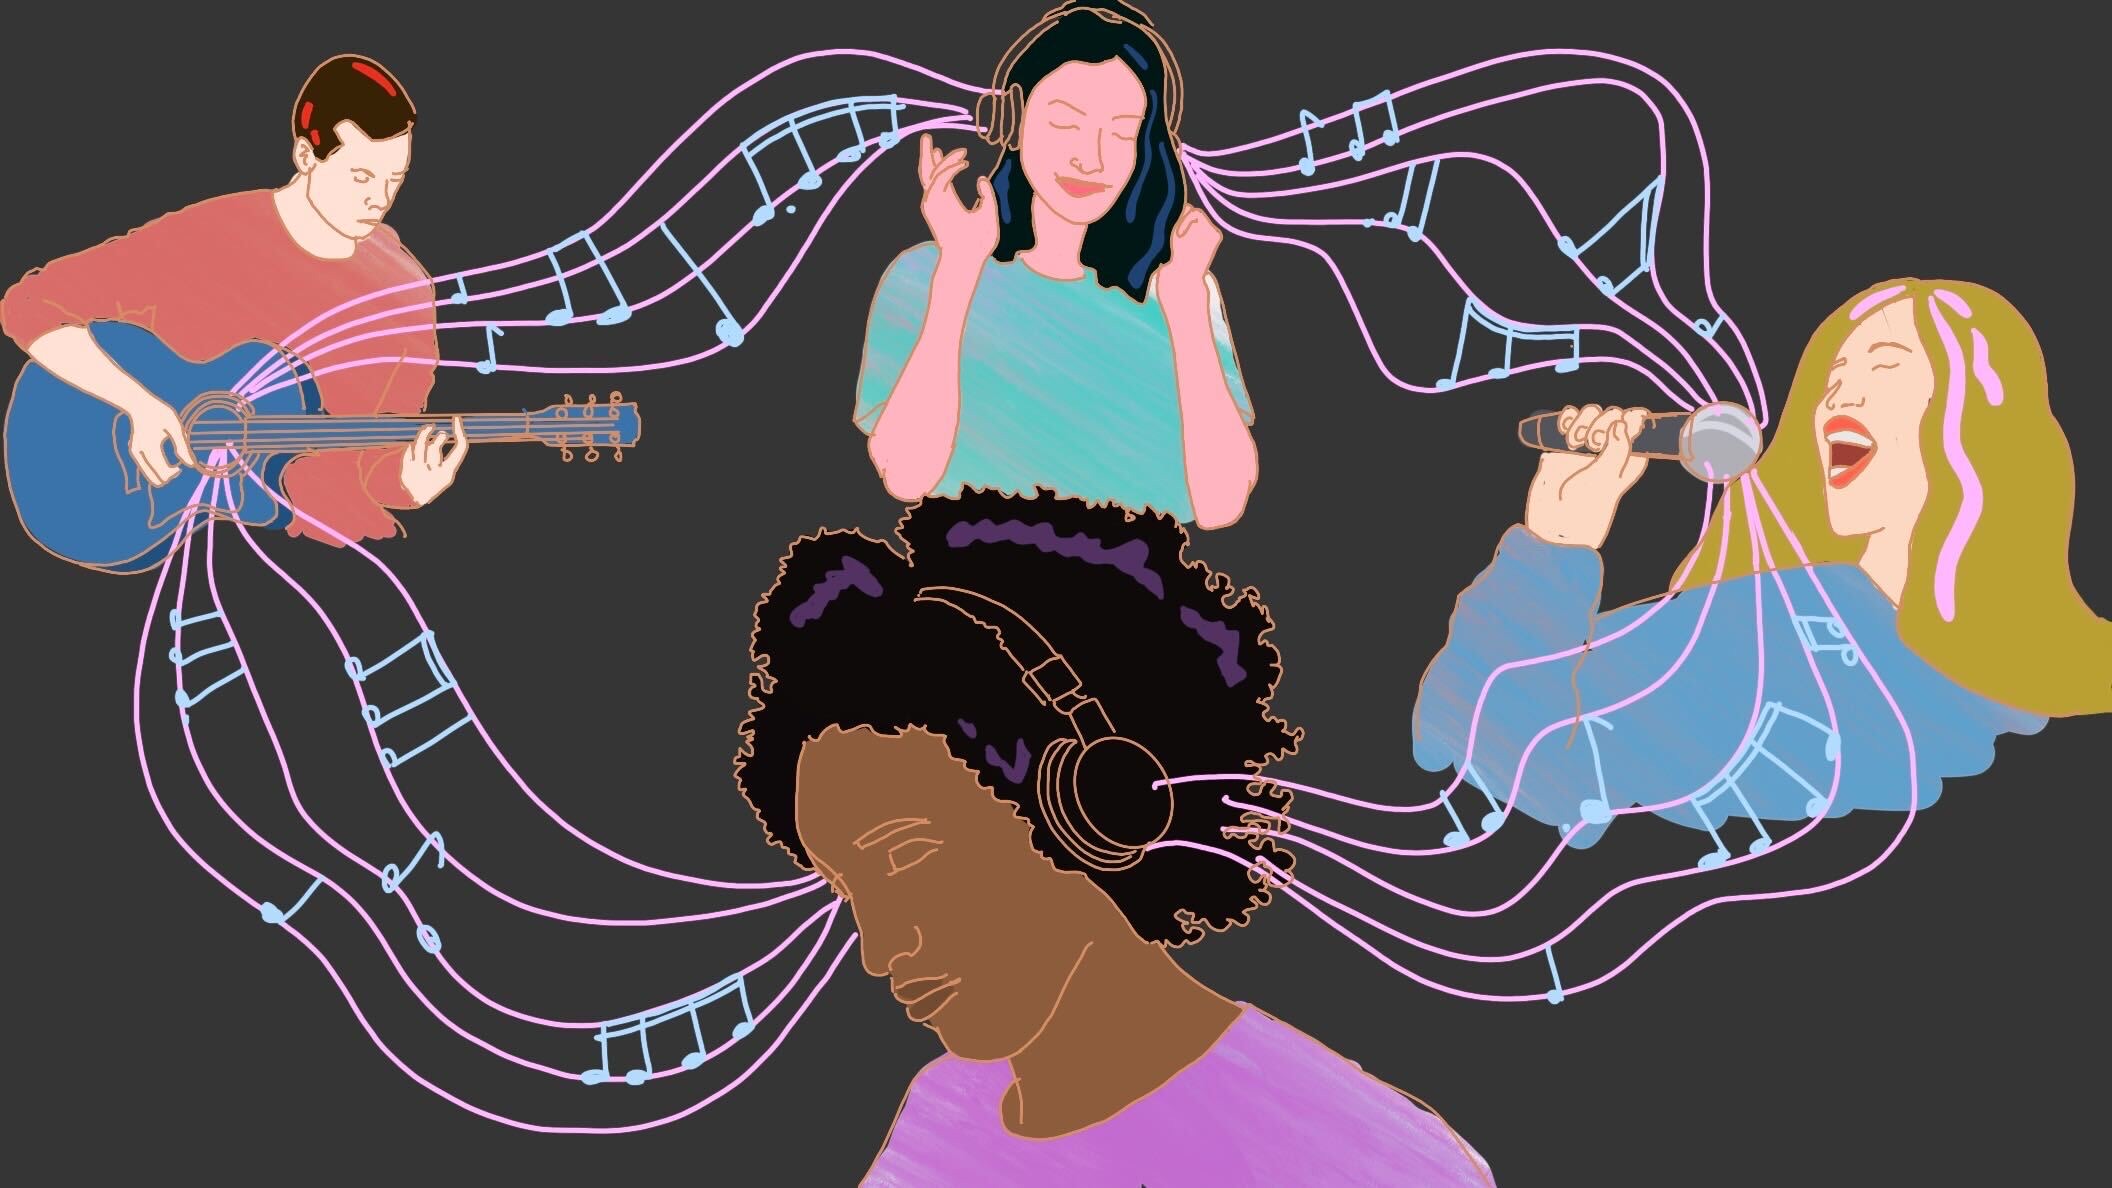 An illustration of 2 people listening to music, a singer and a guitarist all linked by flowing musical staves.